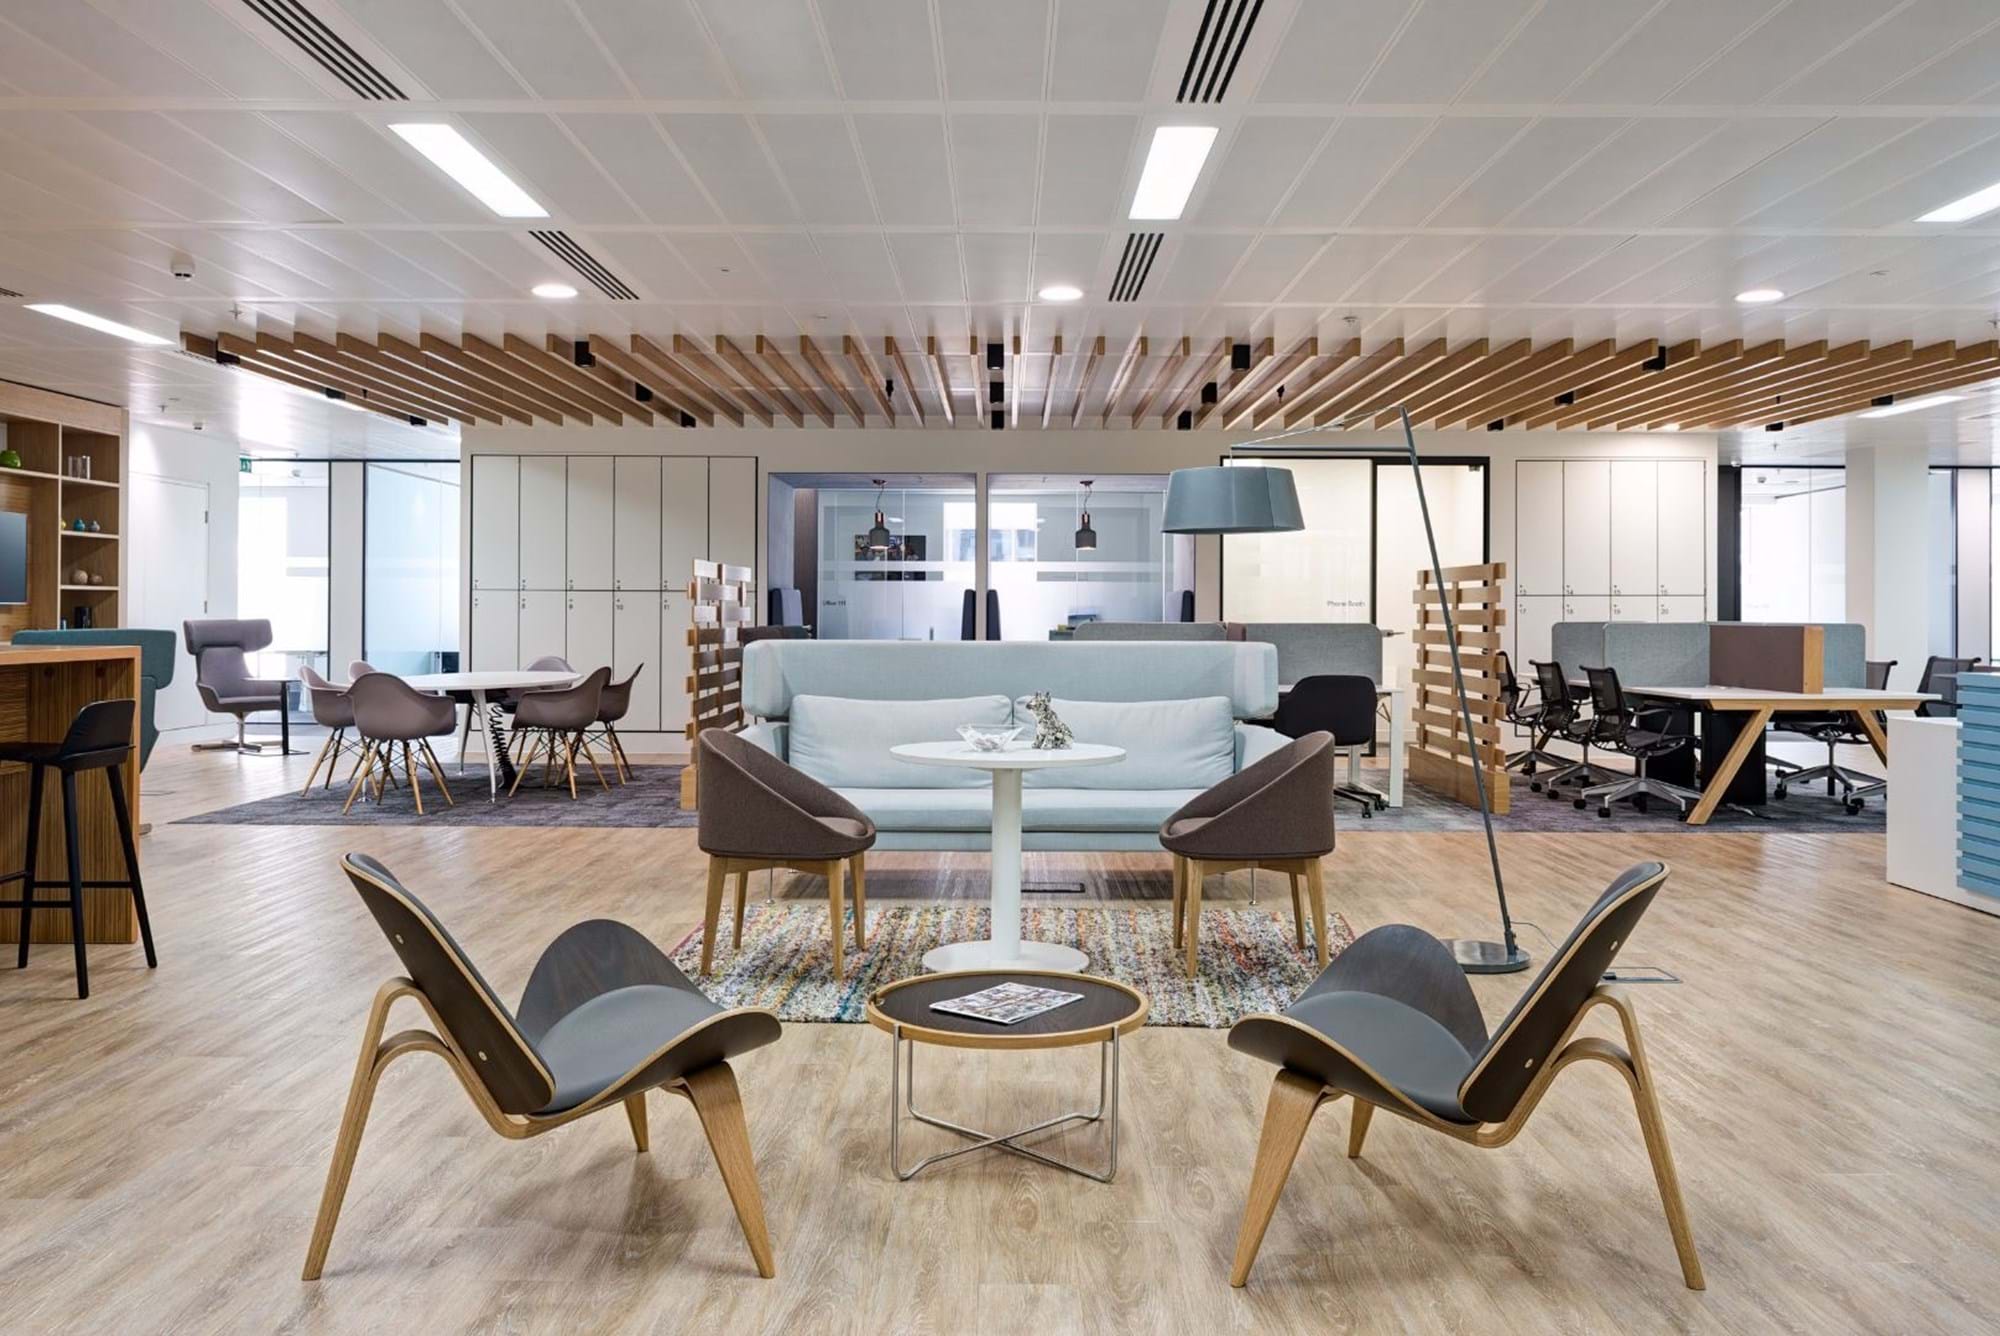 Modus Workspace office design, fit out and refurbishment - Regus St Marys Axe - Regus SMA 03 highres sRGB.jpg